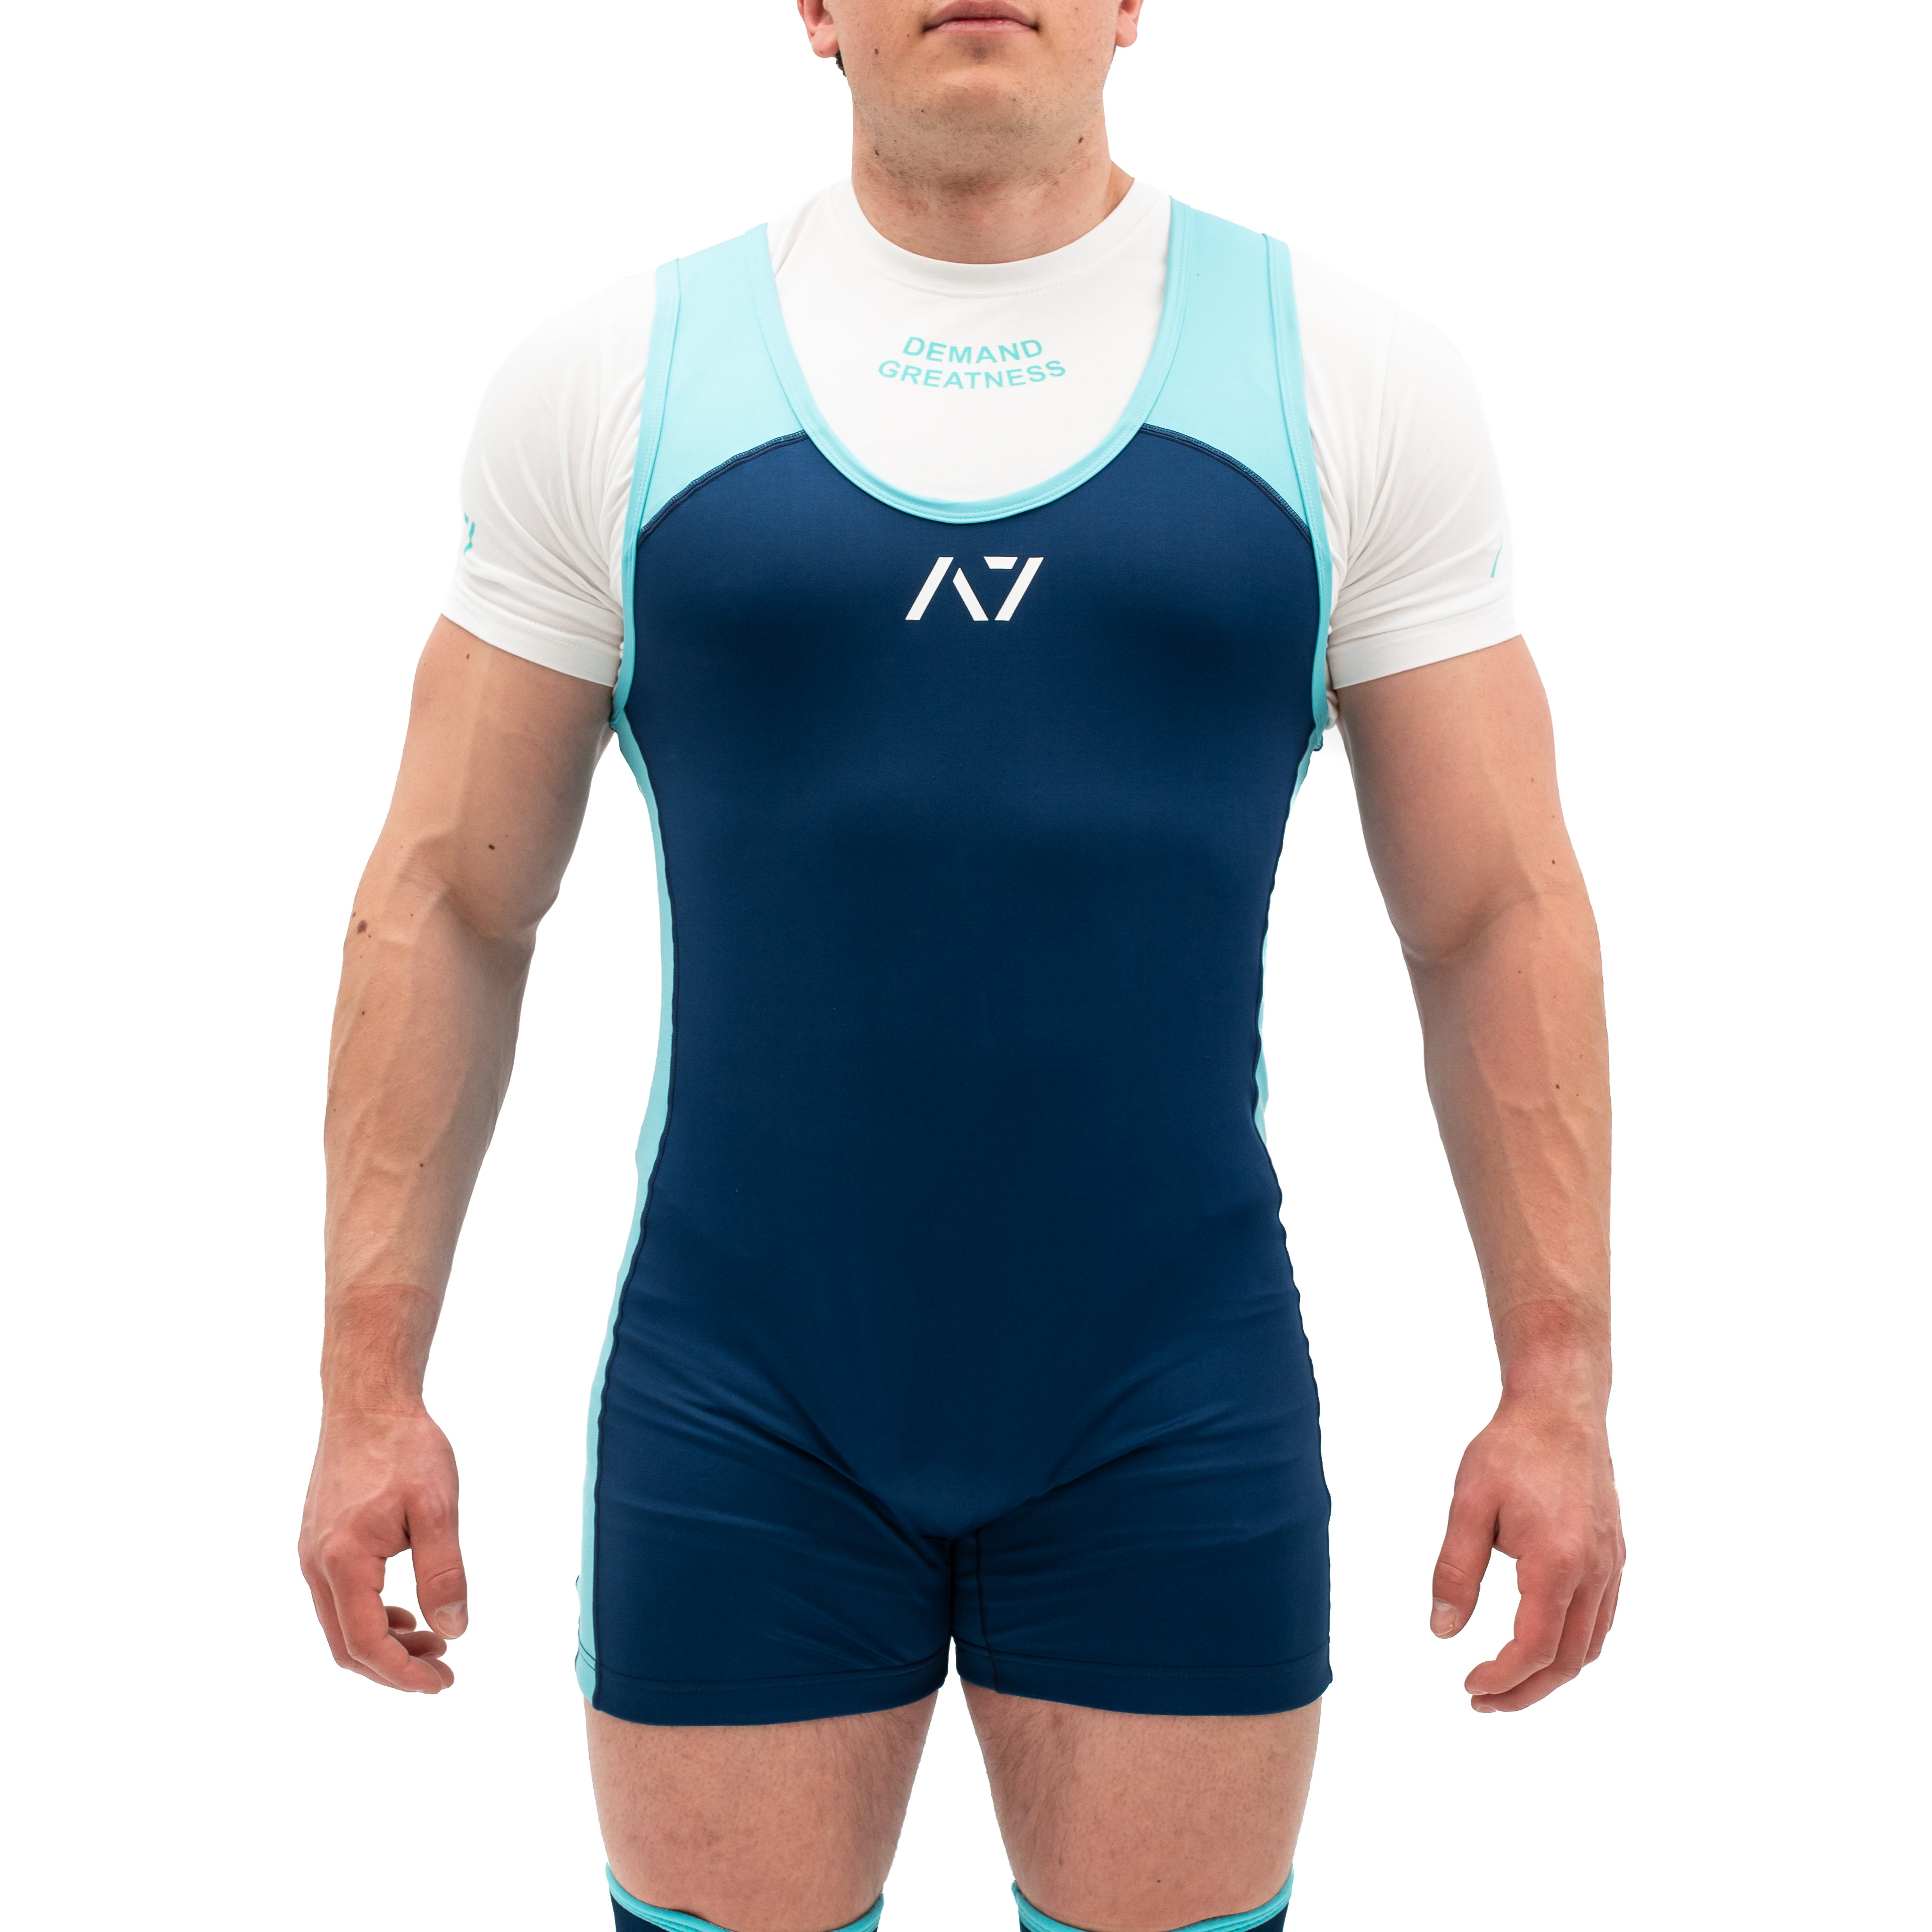 Iced Blue Powerlifting Singlet - IPF Approved